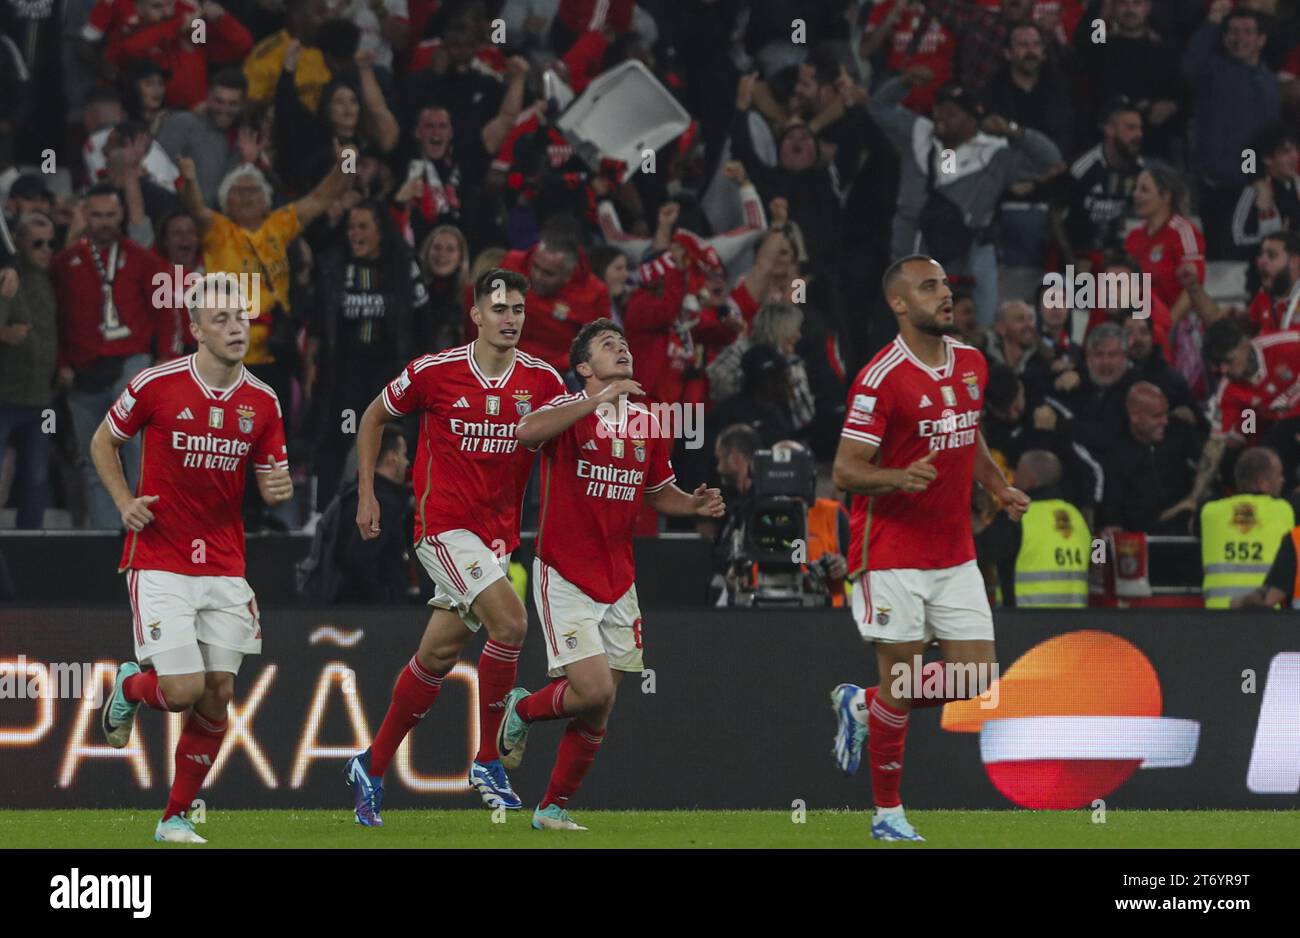 Lisbon, 11/12/2023 - Sport Lisboa e Benfica hosted Sporting Clube de Portugal this evening at the Estádio da Luz in Lisbon, in a game counting for the eleventh round of the Primeira Liga 2023/24. João Neves celebrates the 1-1 (Pedro Rocha / Global Imagens) Credit: Susana Jorge/Alamy Live News Stock Photo